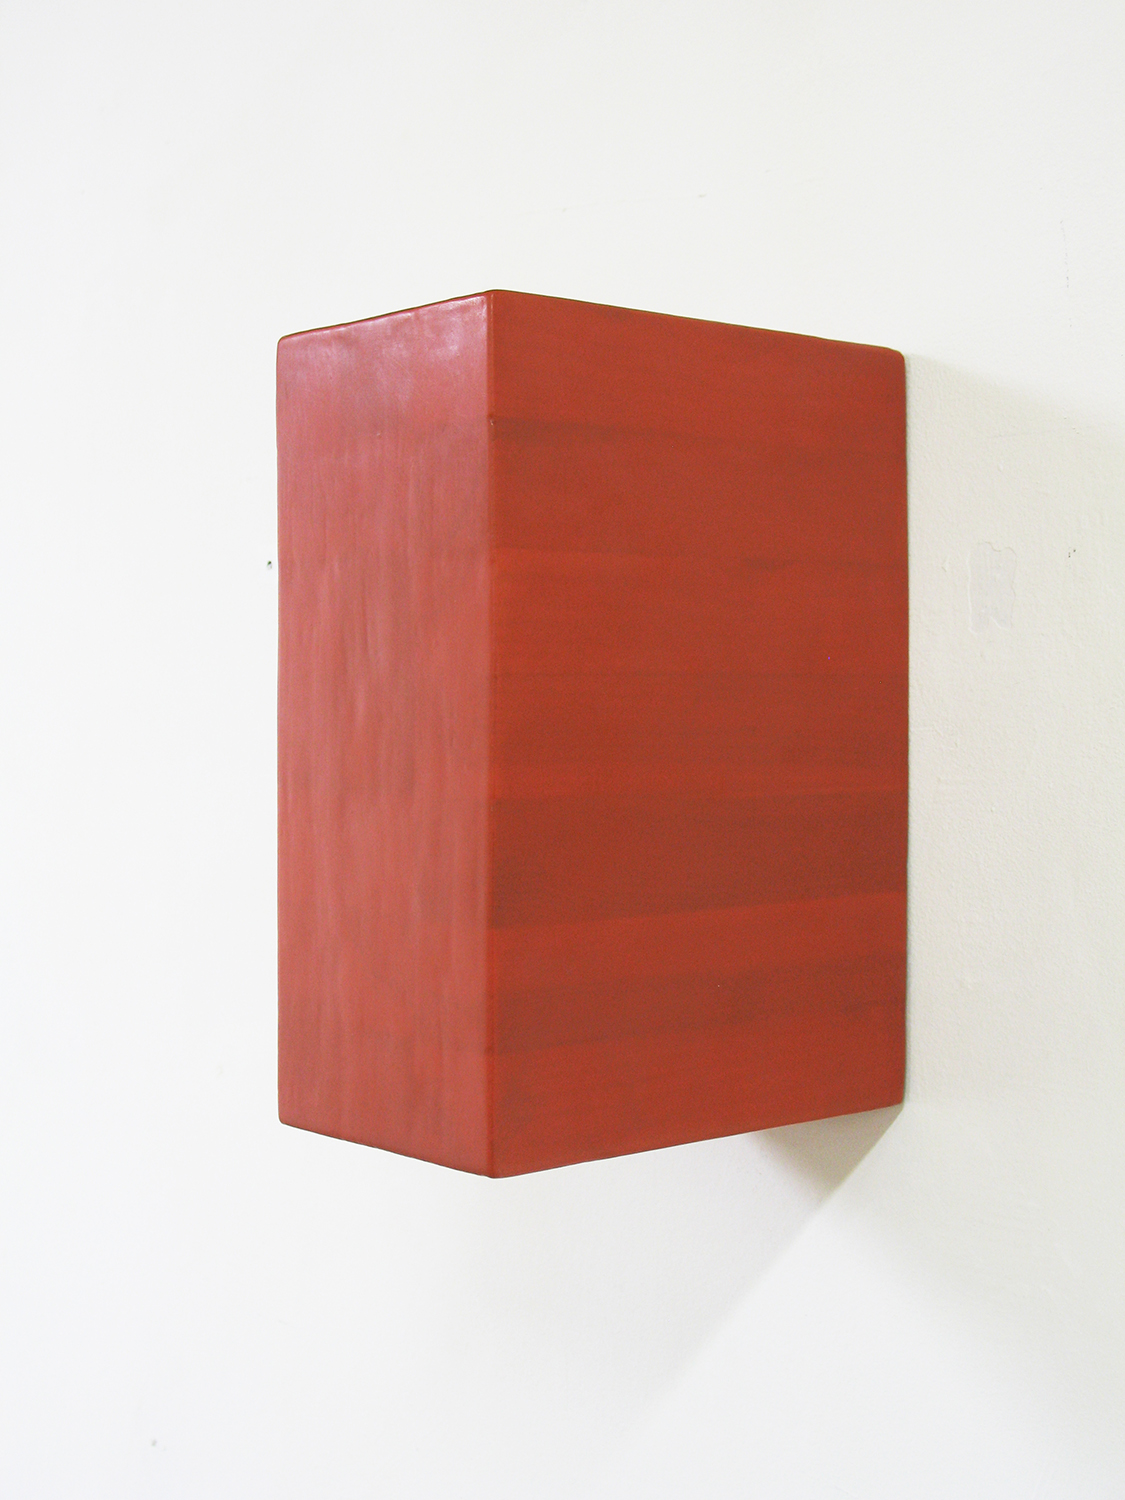 TS0005｜Coloured resin on laminated soft wood｜22.5 x 10 x 16 cm｜2000